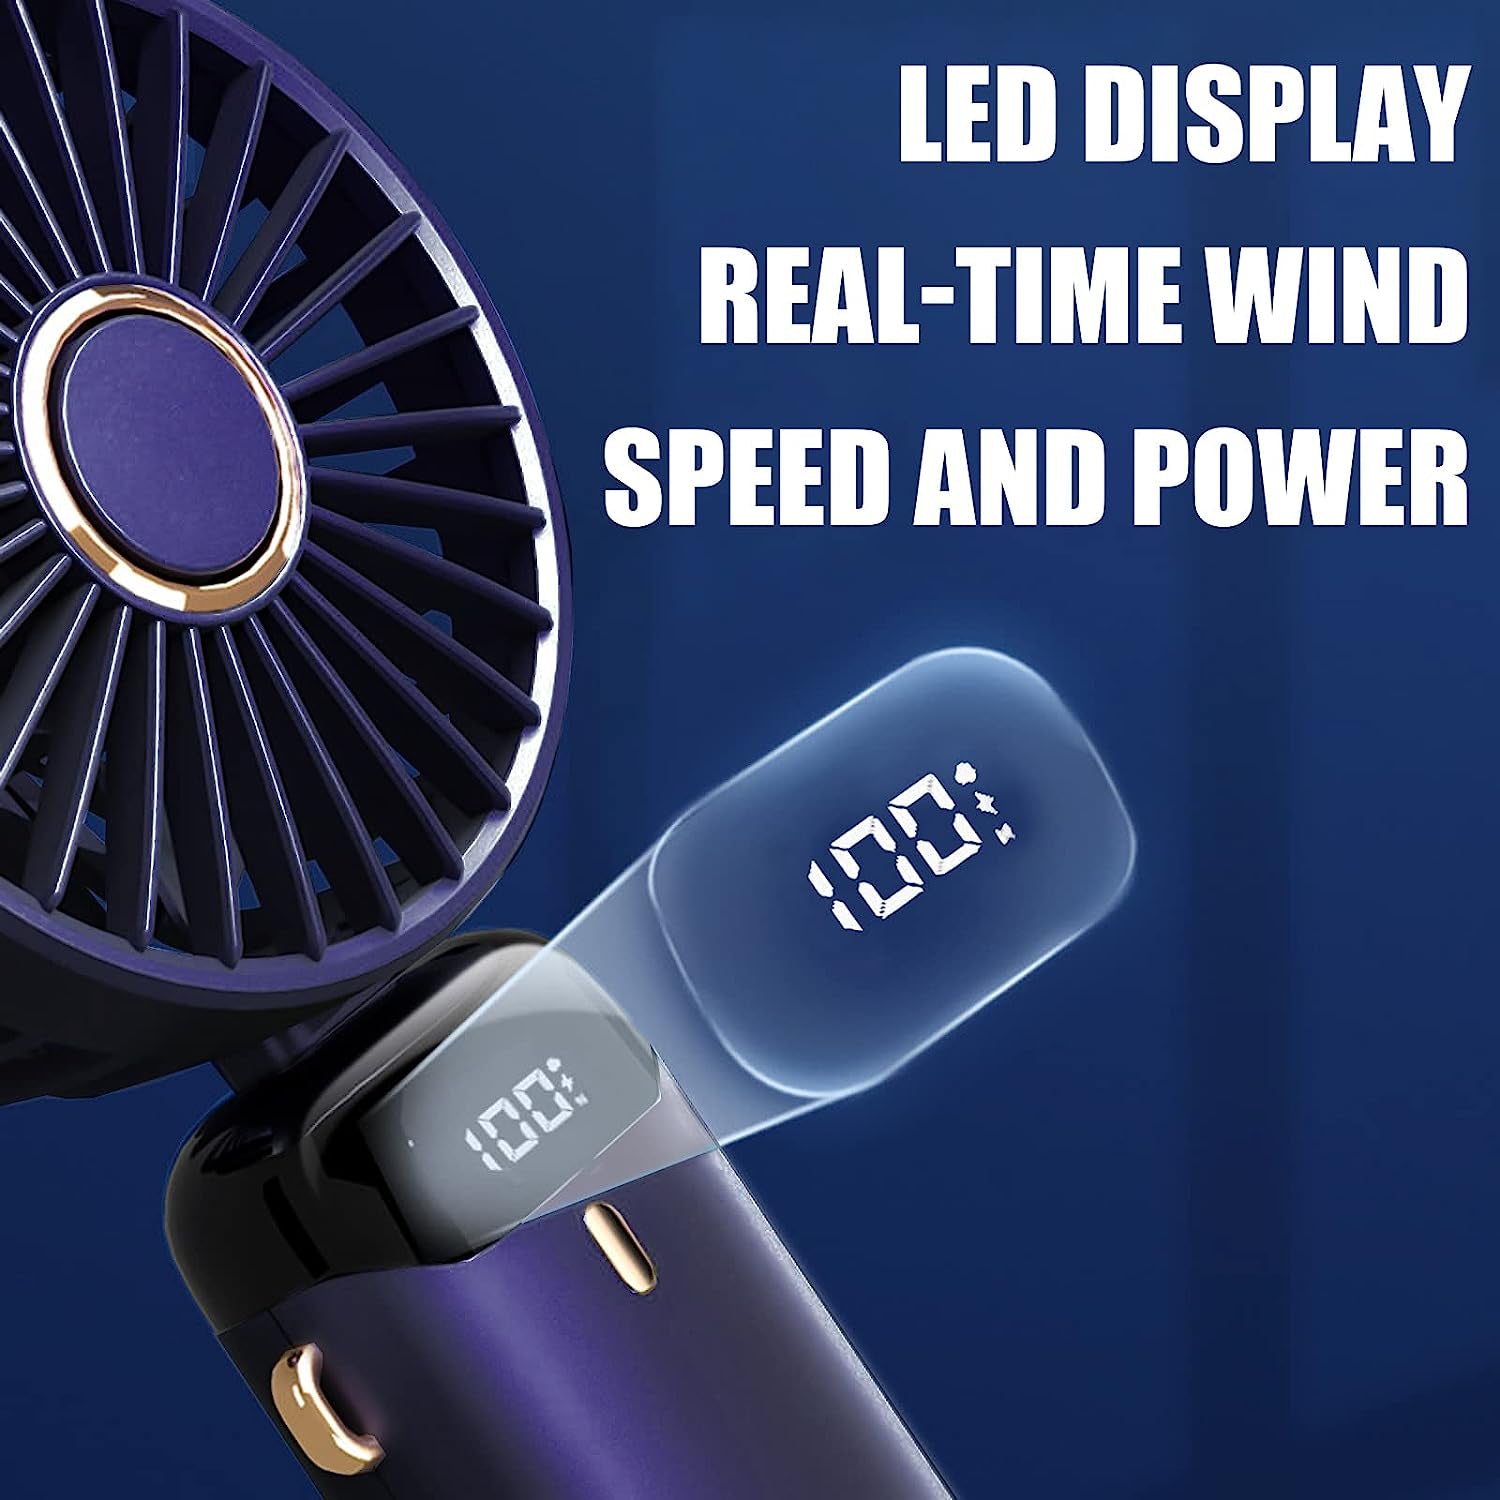 Hand Held Fan,Portable Handheld USB Rechargeable Fans with 5 Speeds,Battery Operated Mini Fan Foldable Desk Desktop Fans with LED Display for Home Office Bedroom Outdoor Travel (Darkblue)